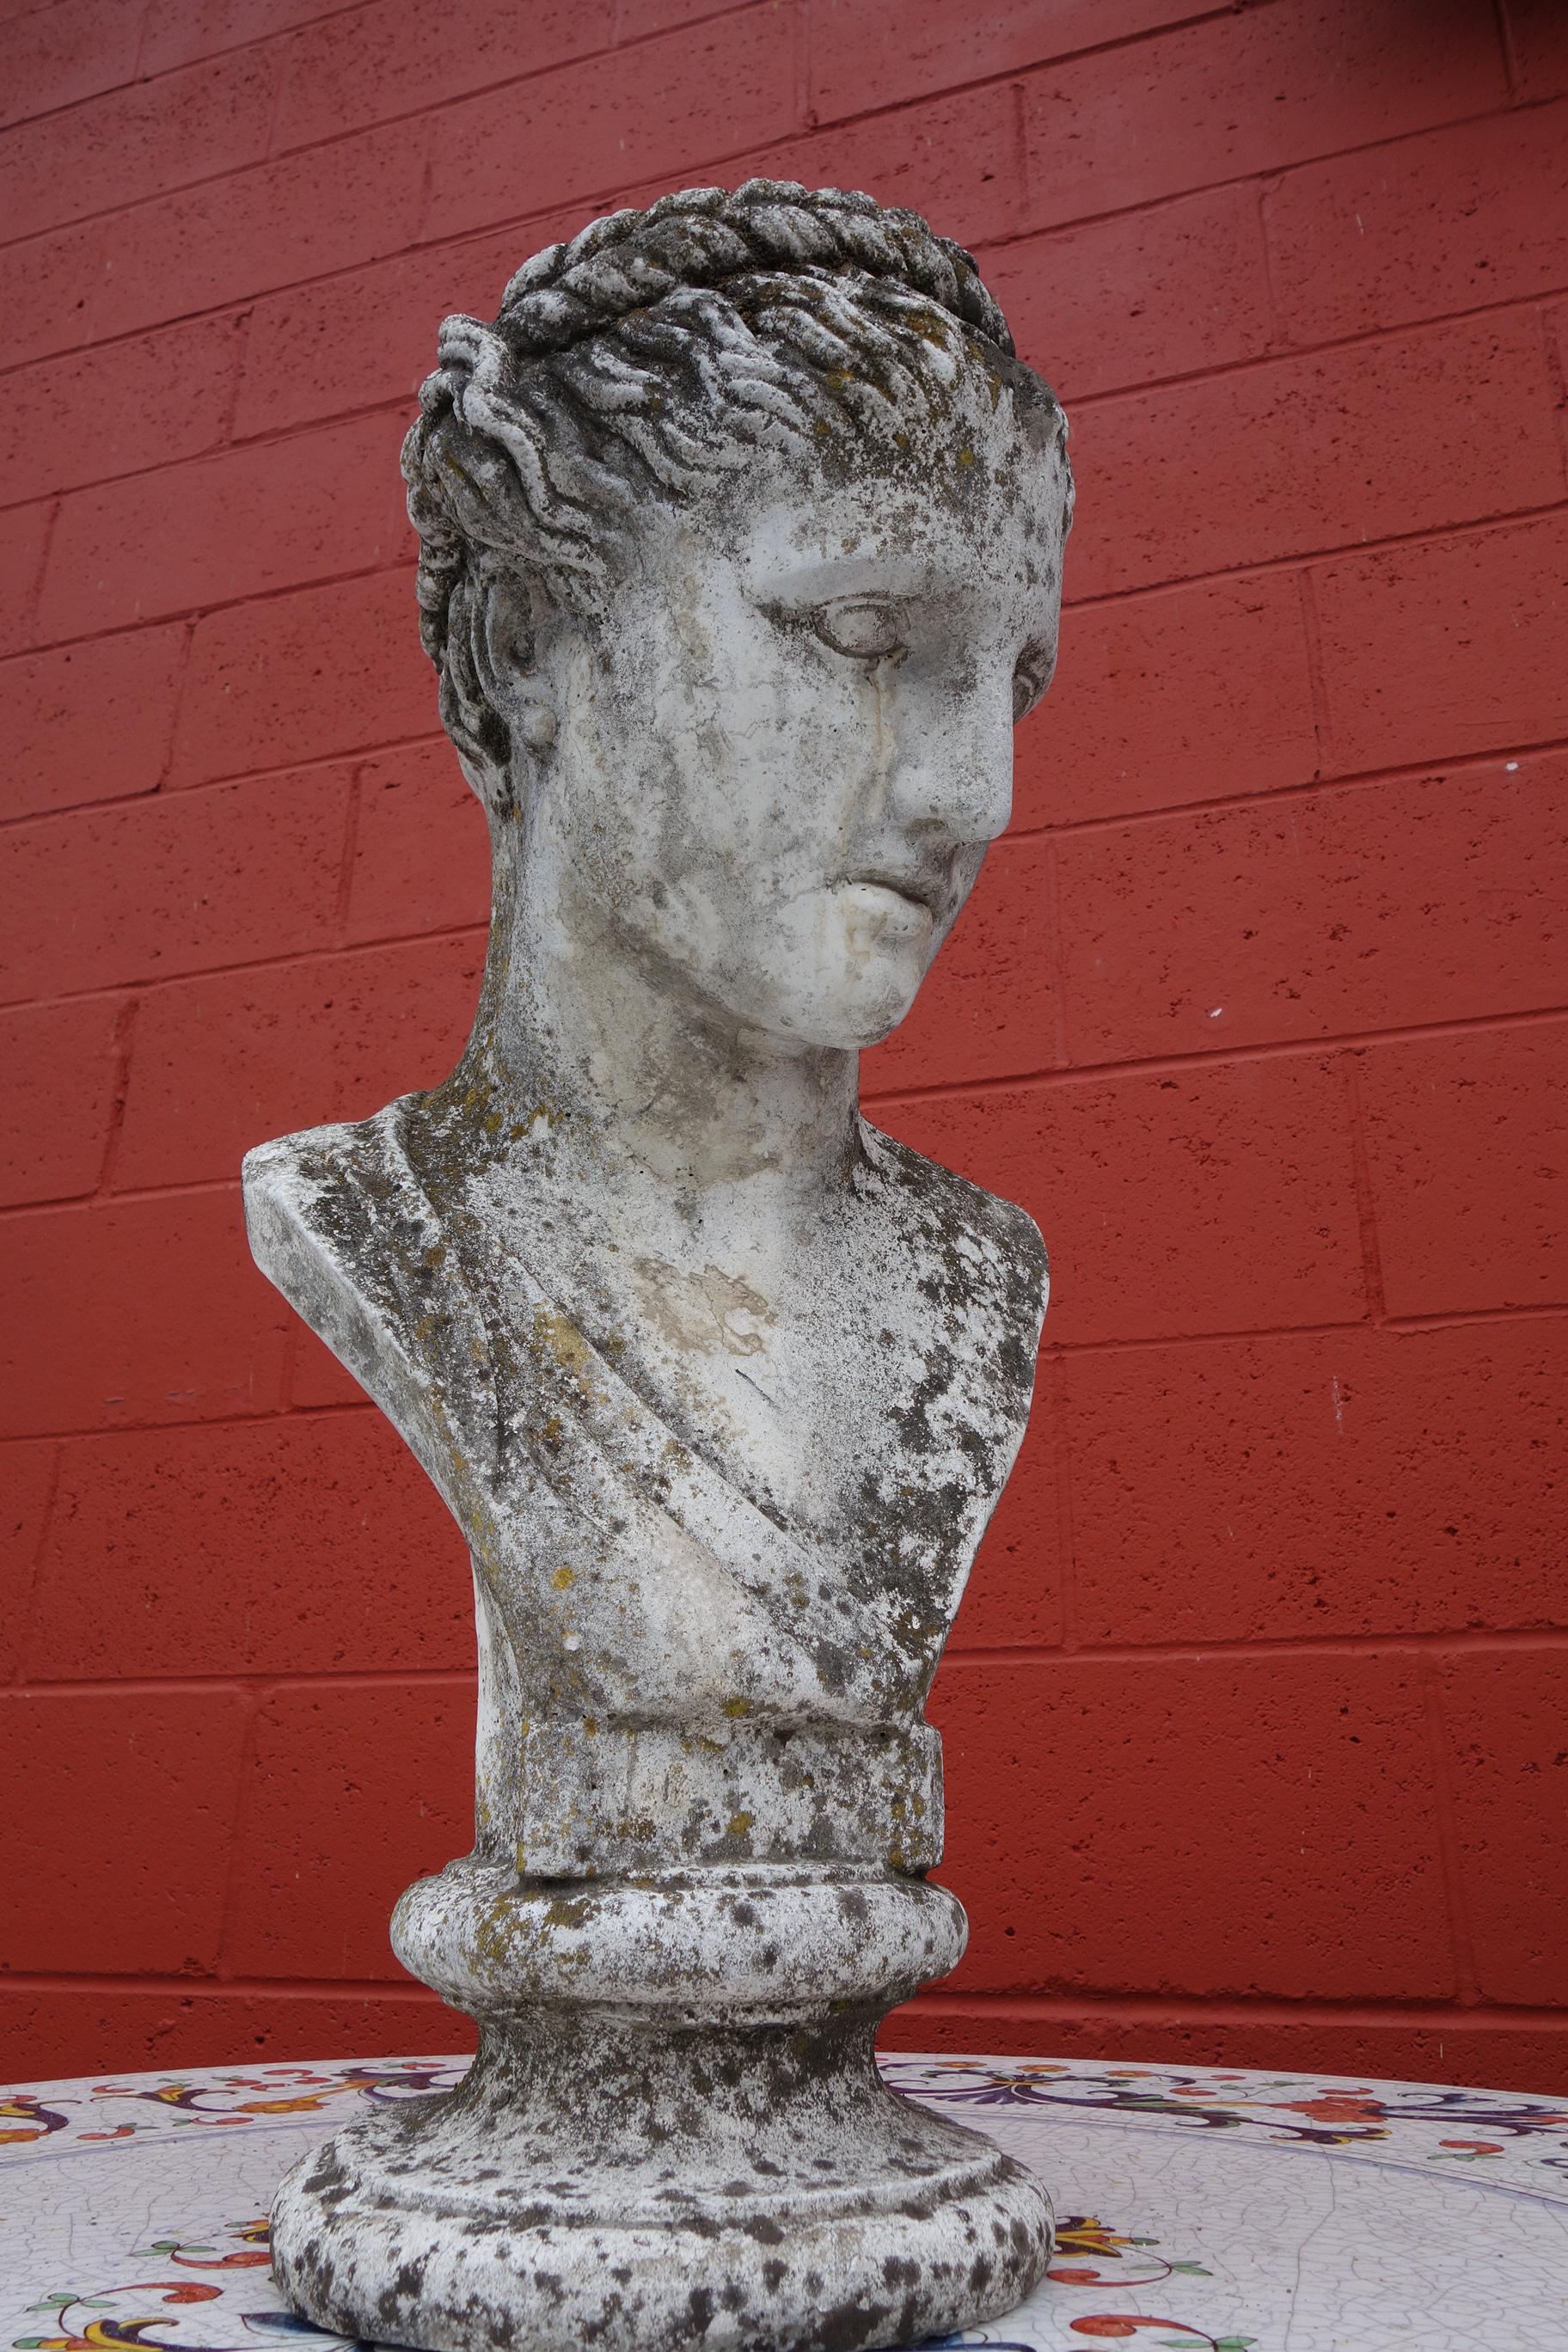 19th Century Italian Renaissance Style Hermes Bust in Grisaglia from Lake Como 2